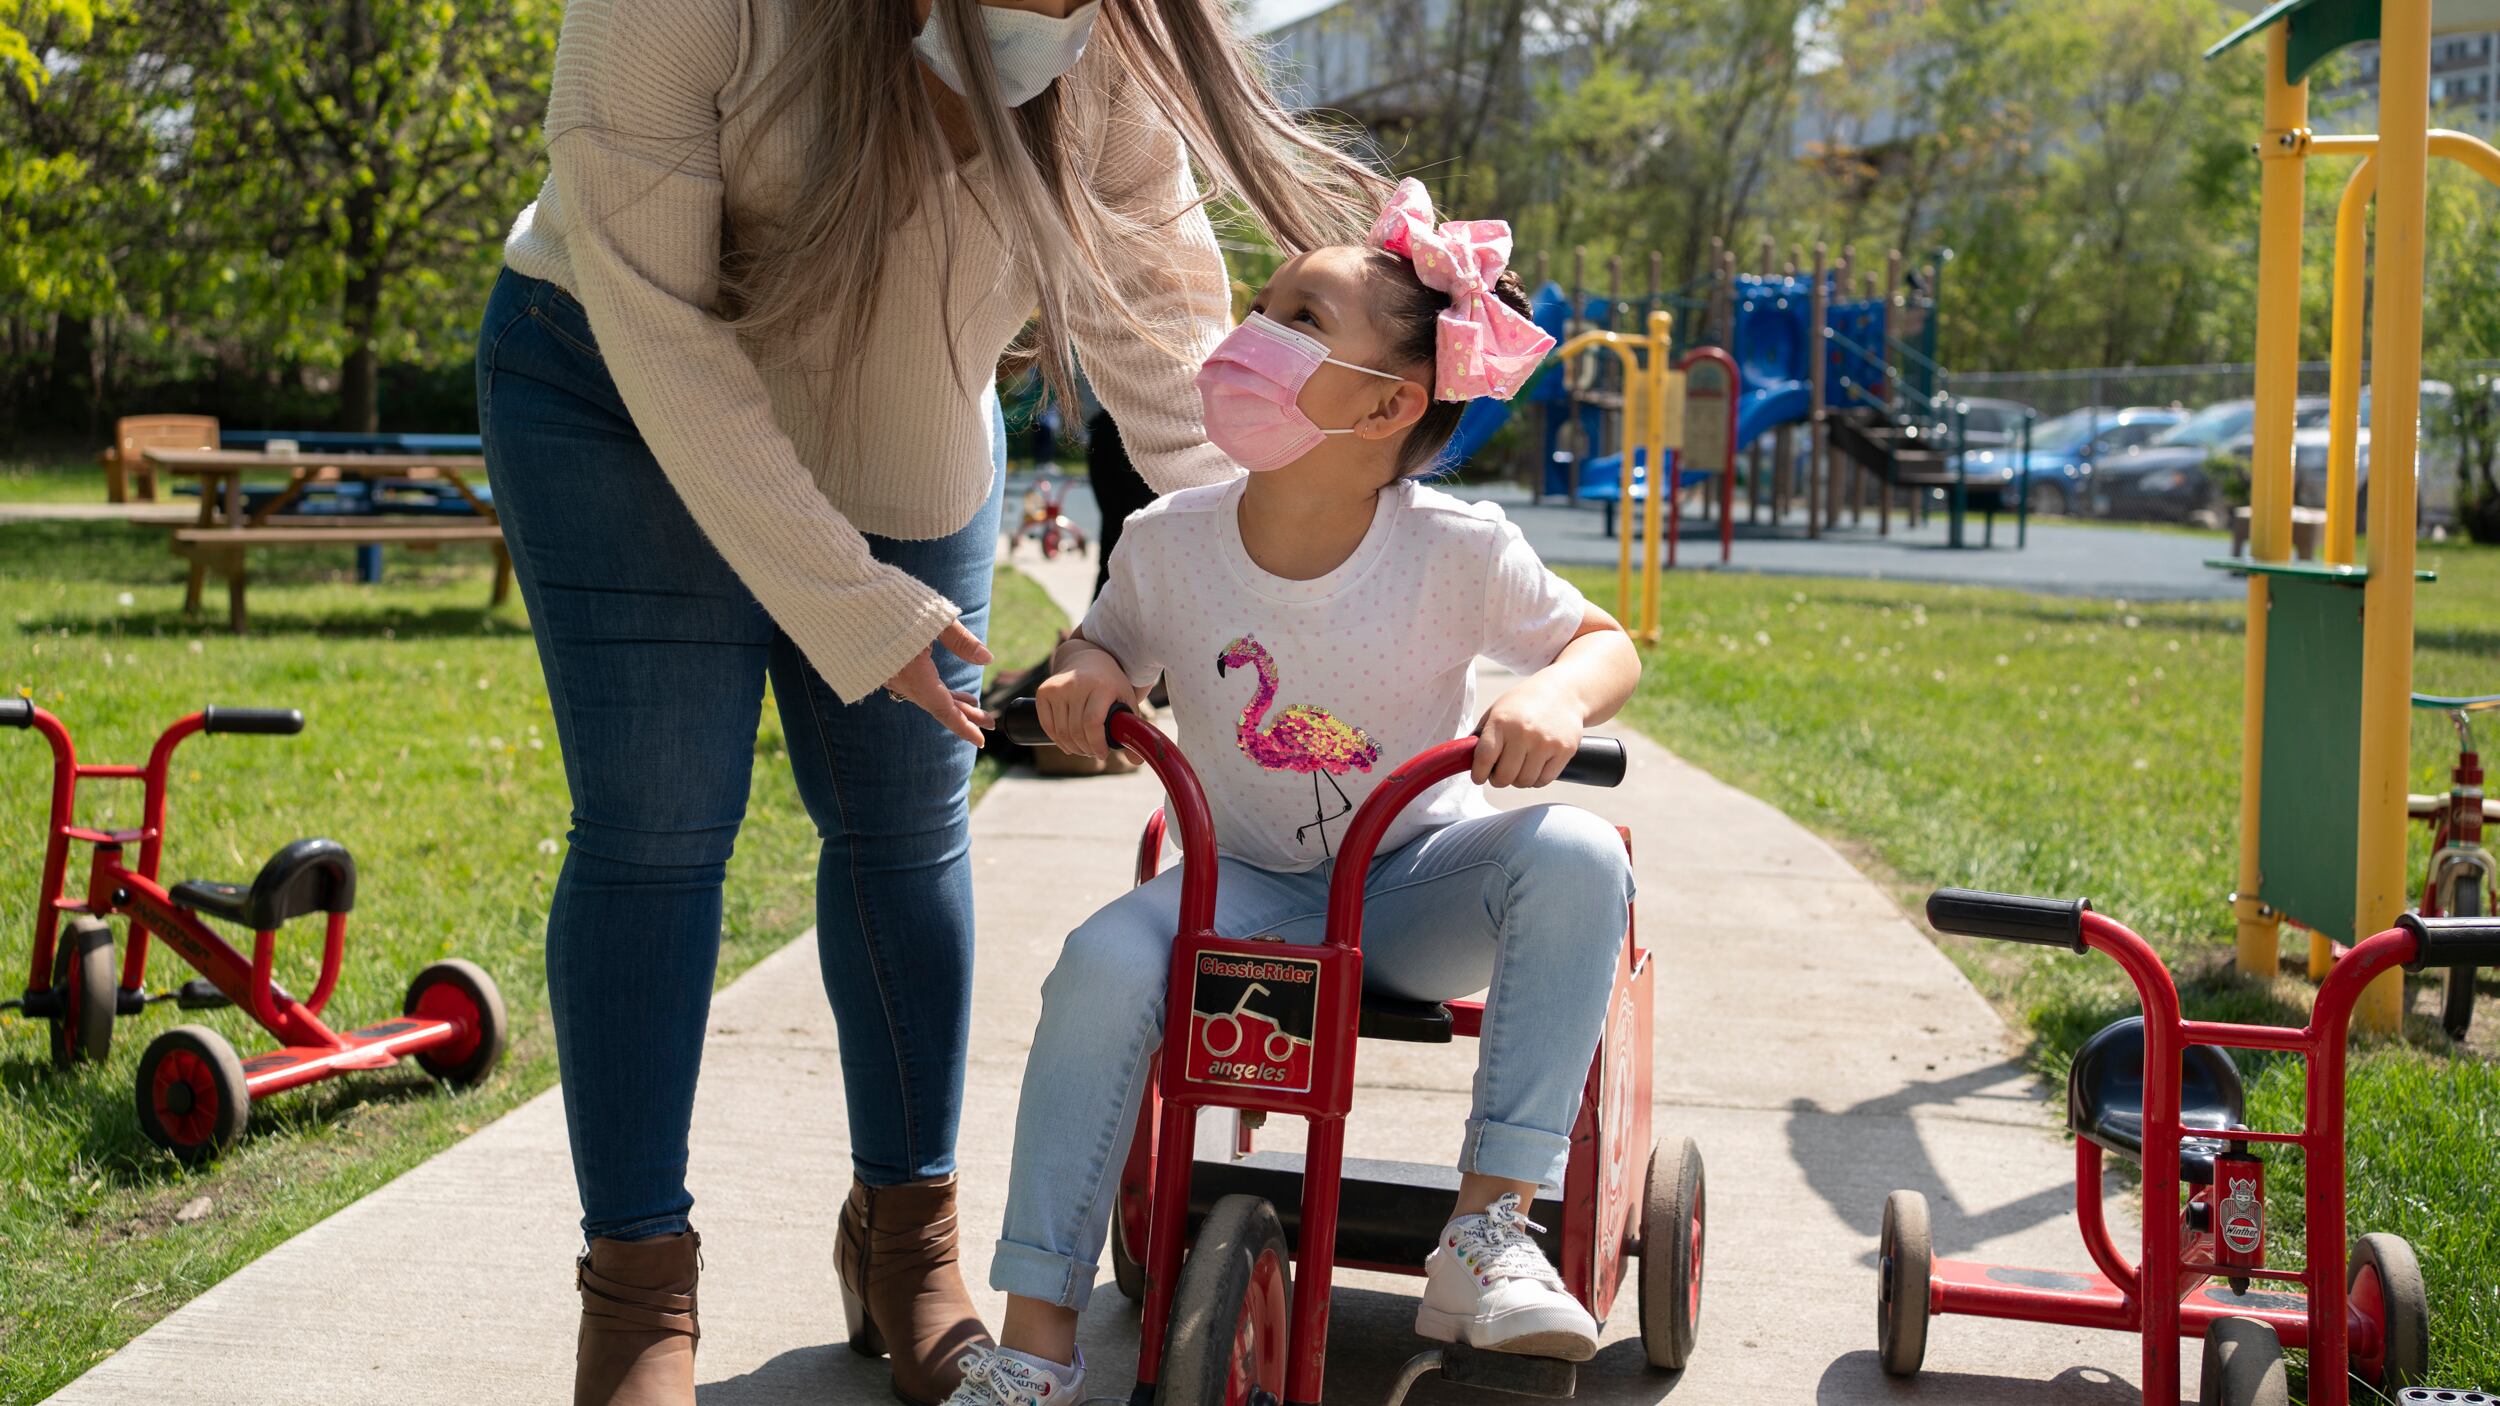 A mother wearing jeans, tan shirt and protective mask pushes her daughter on a red tricycle. The daughter is wearing a white flamingo shirt, pink mask, pink bow and jeans.